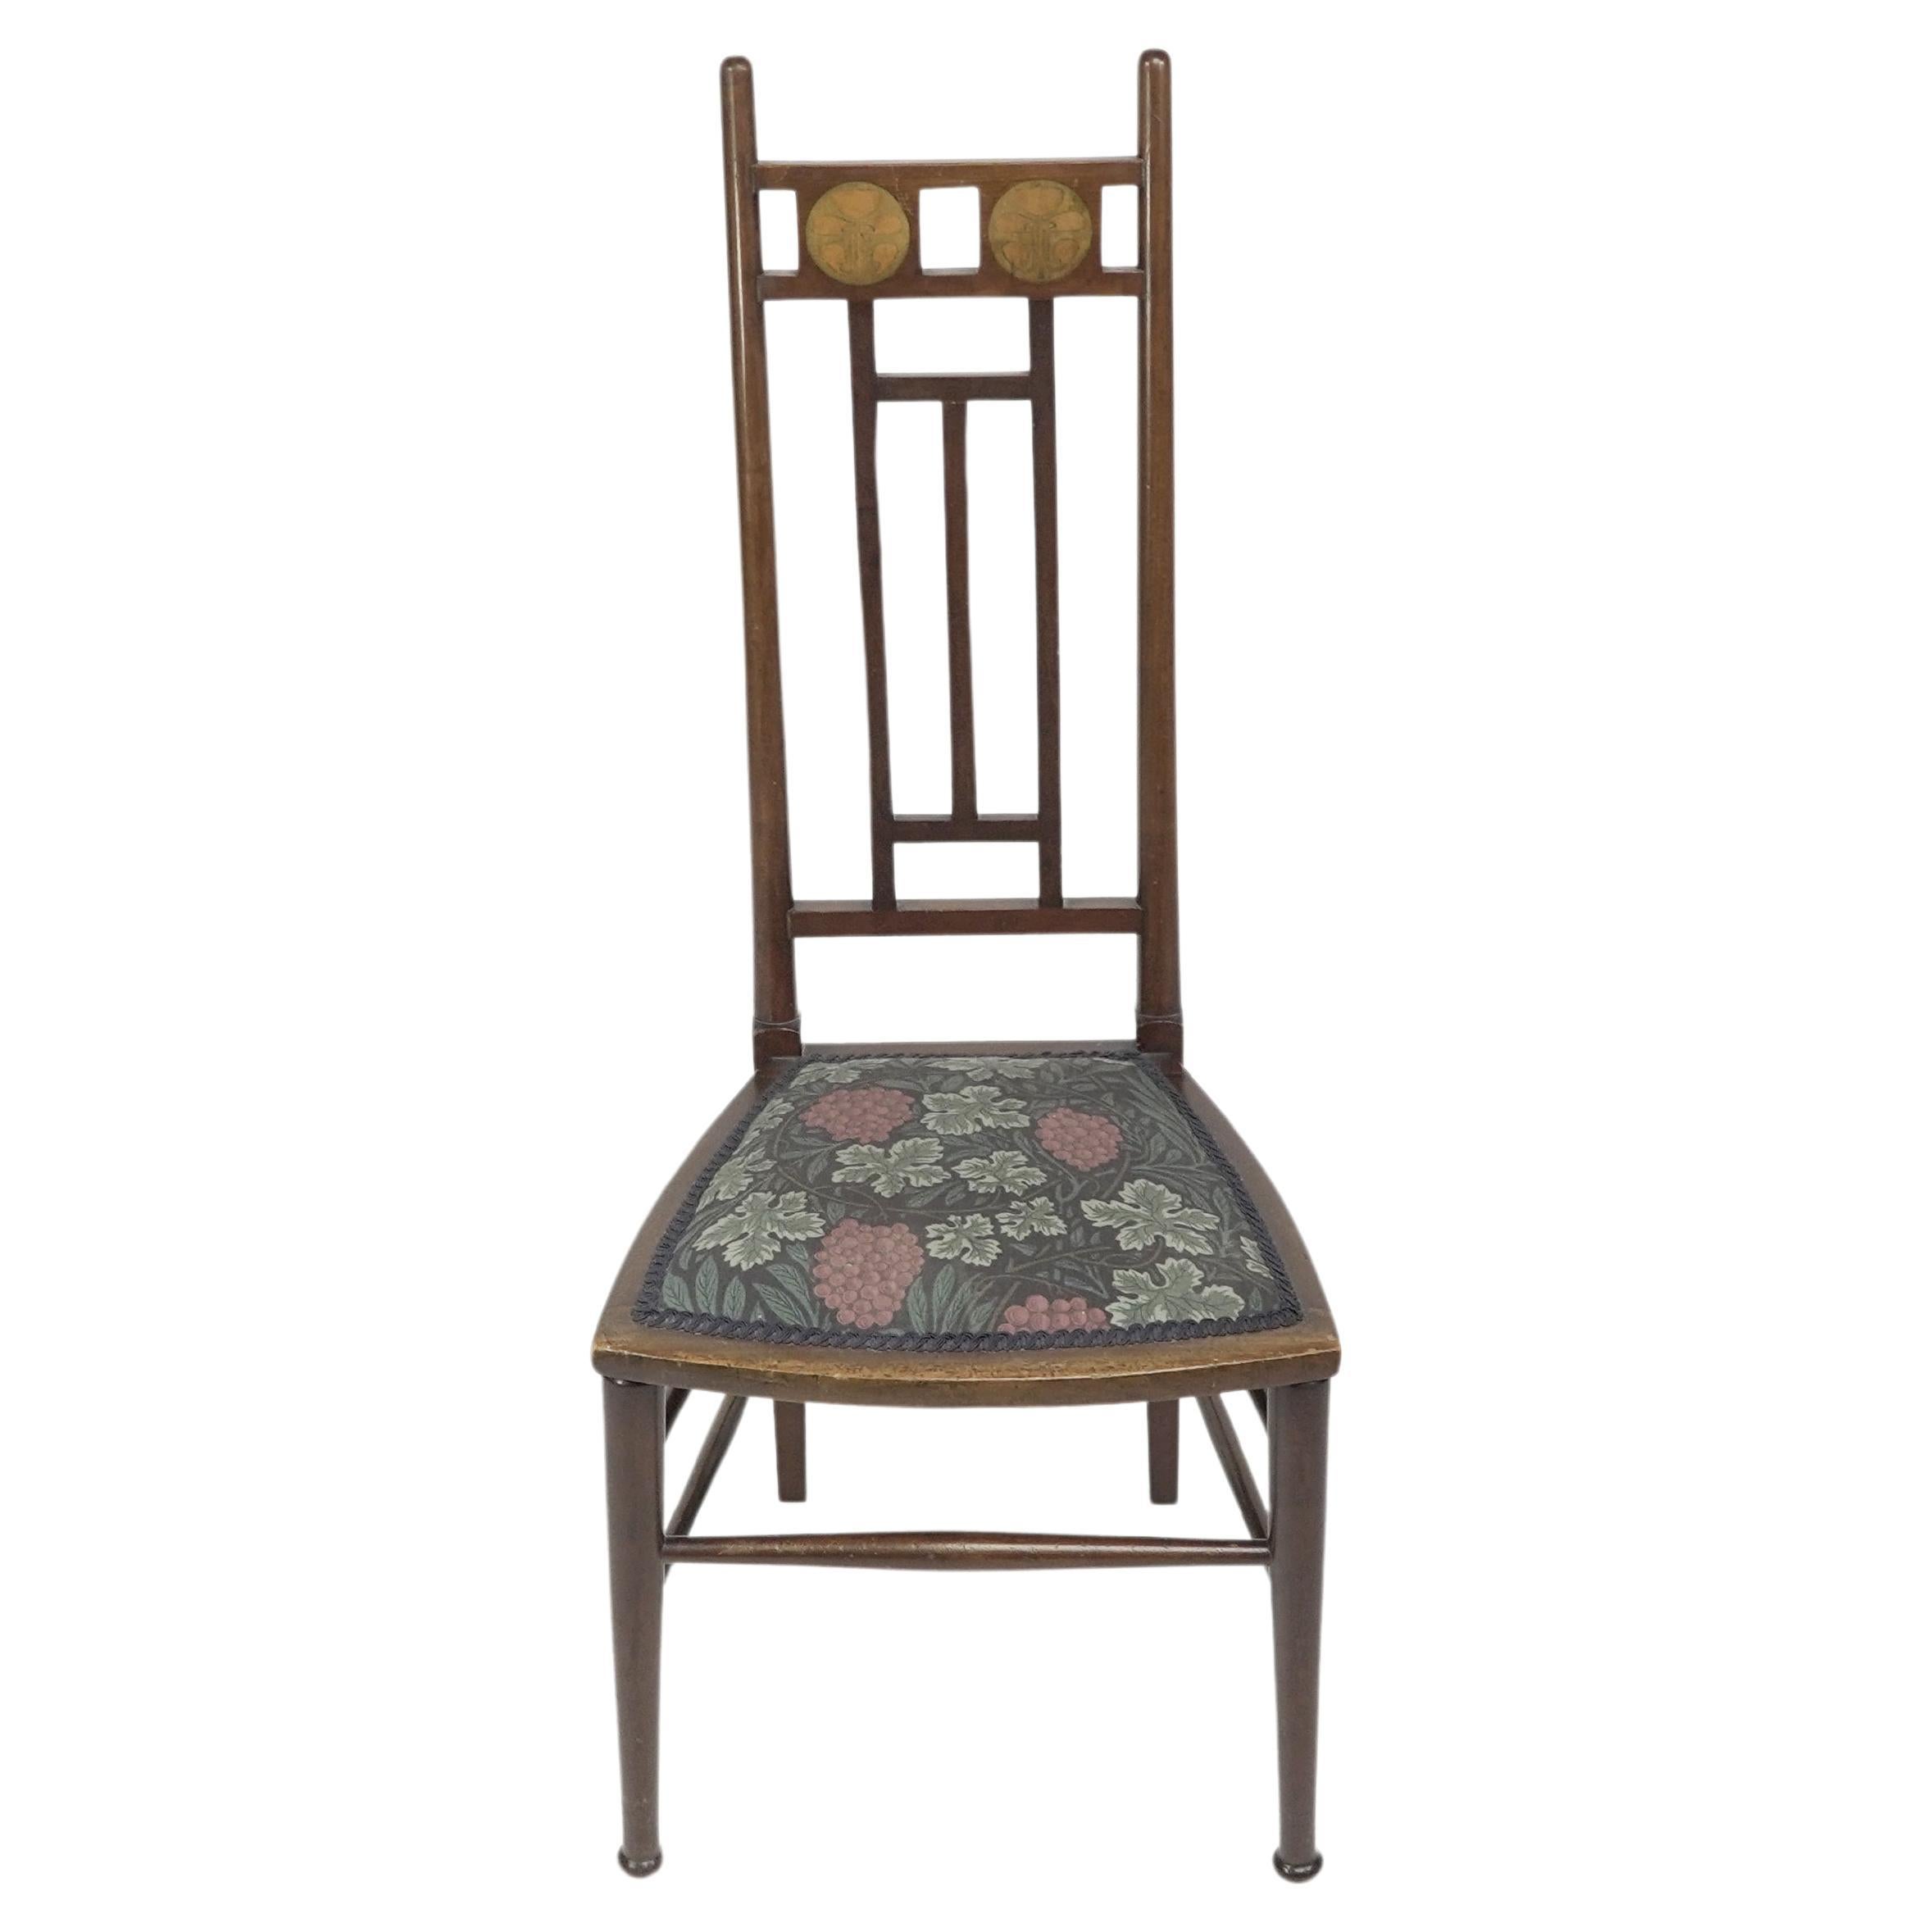 E G Punnett for Liberty & Co. A Walnut side chair with inlaid floral decoration.